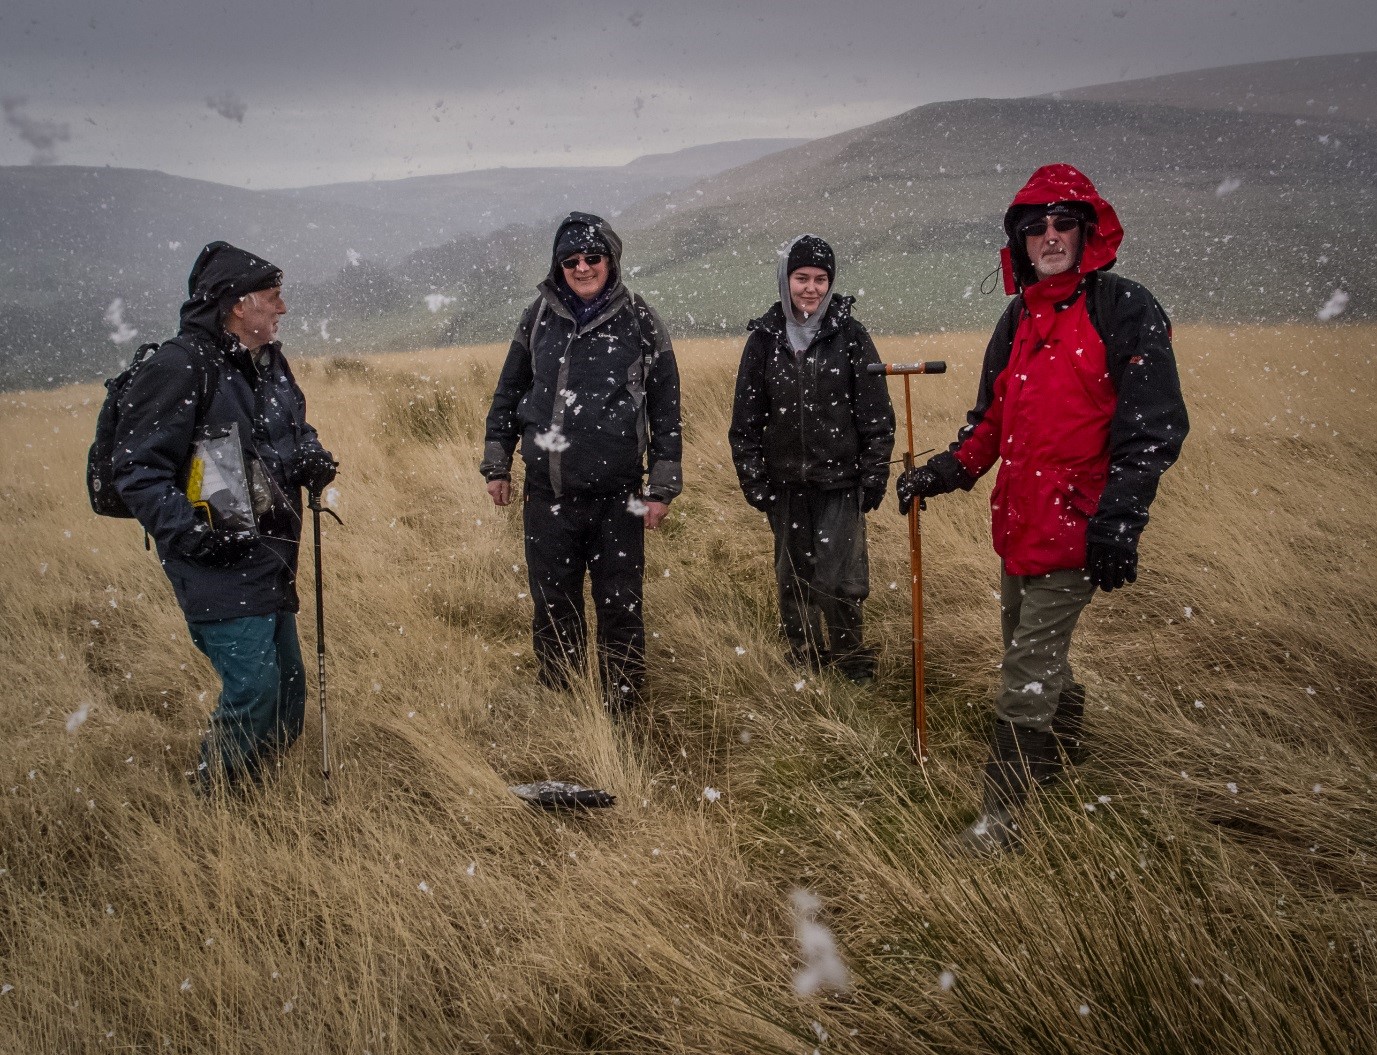 Monitoring on Marsden Moor by Alan Stopher